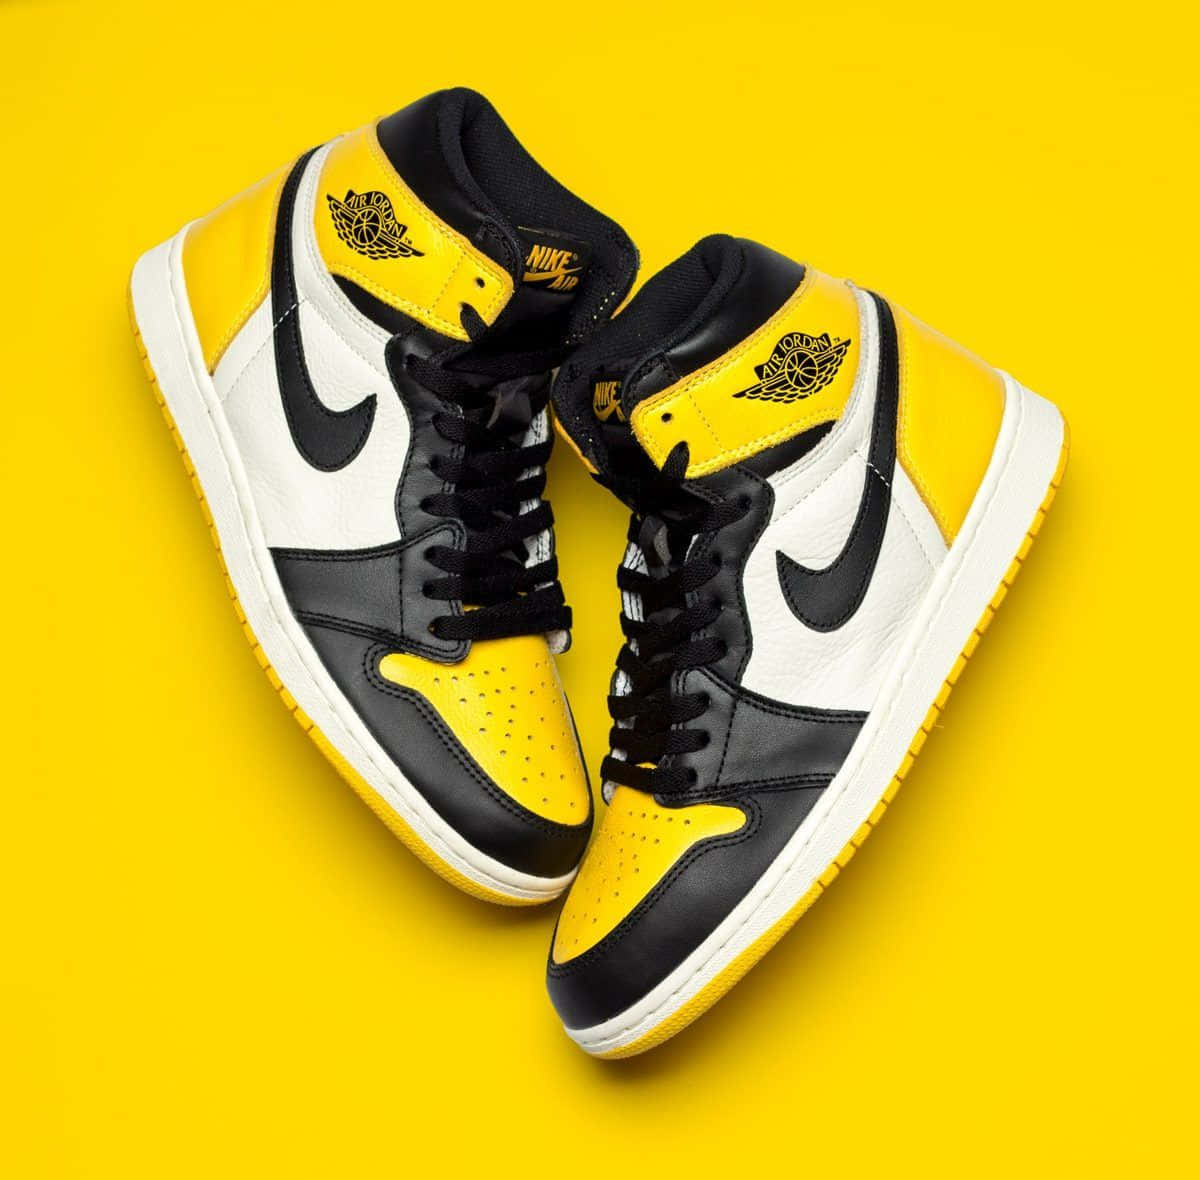 "Stay True To Your Style with Yellow Jordan" Wallpaper